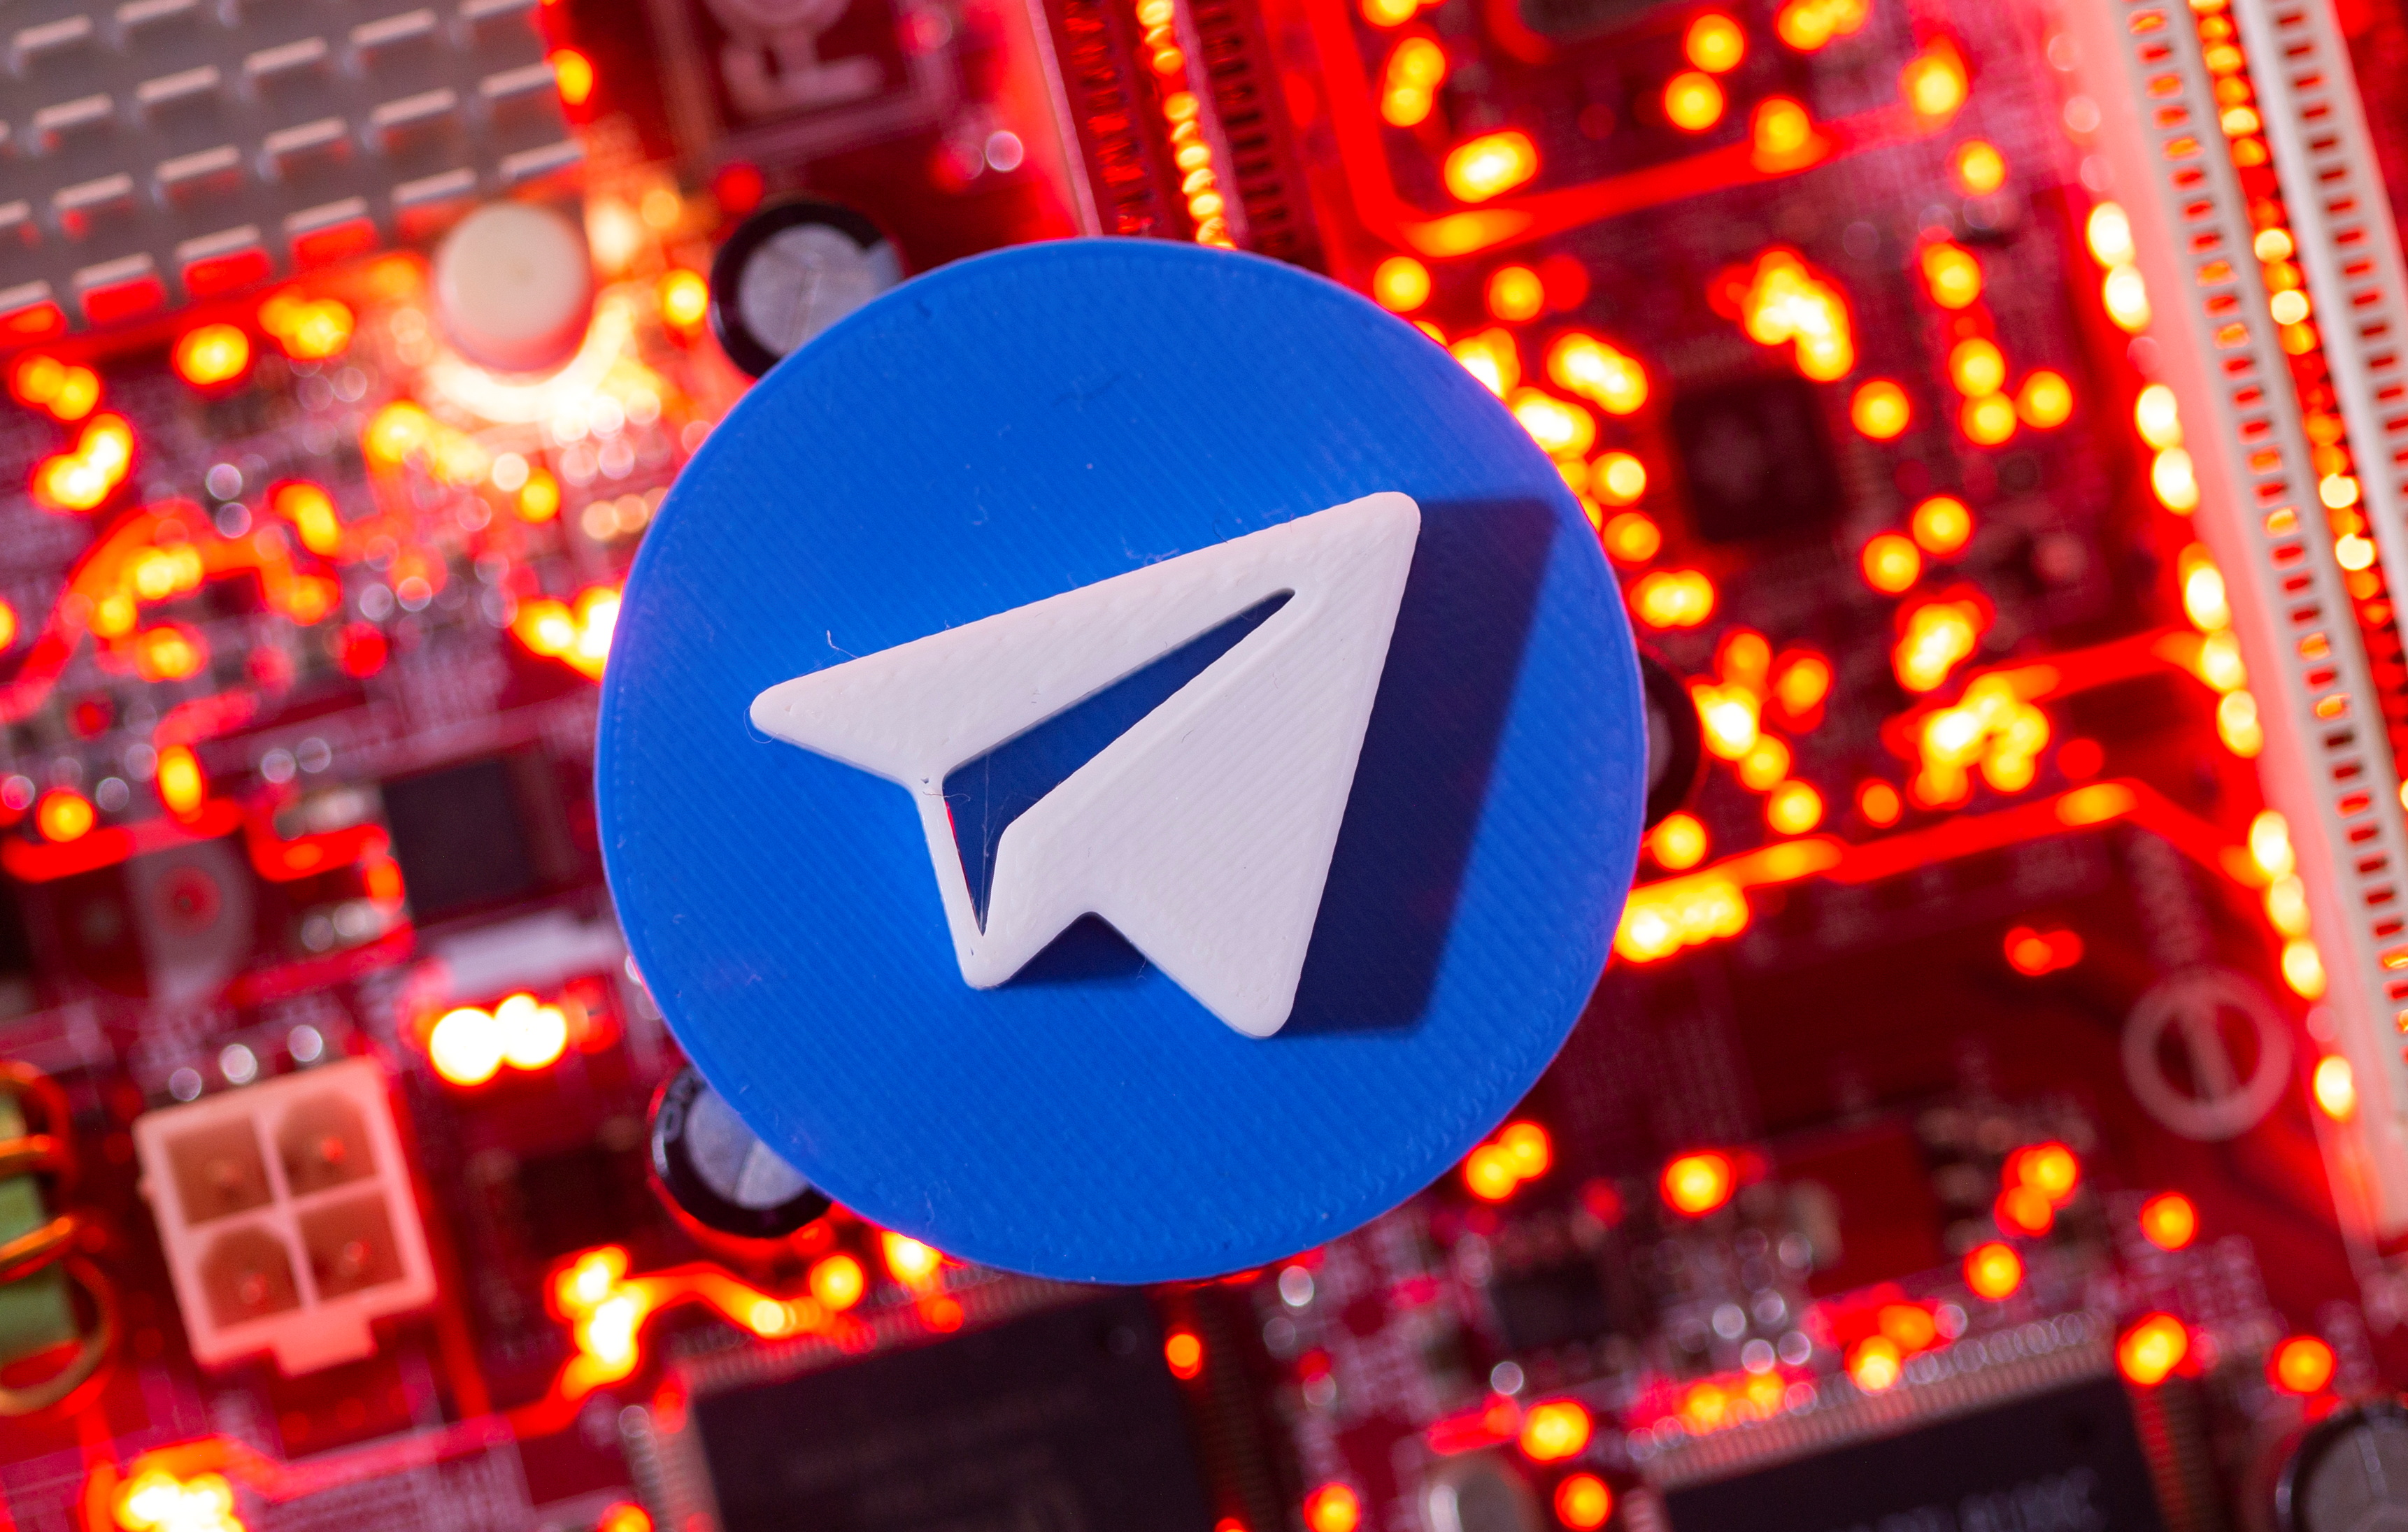 Telegram may restrict some channels if situation in Ukraine escalates, says founder | Reuters